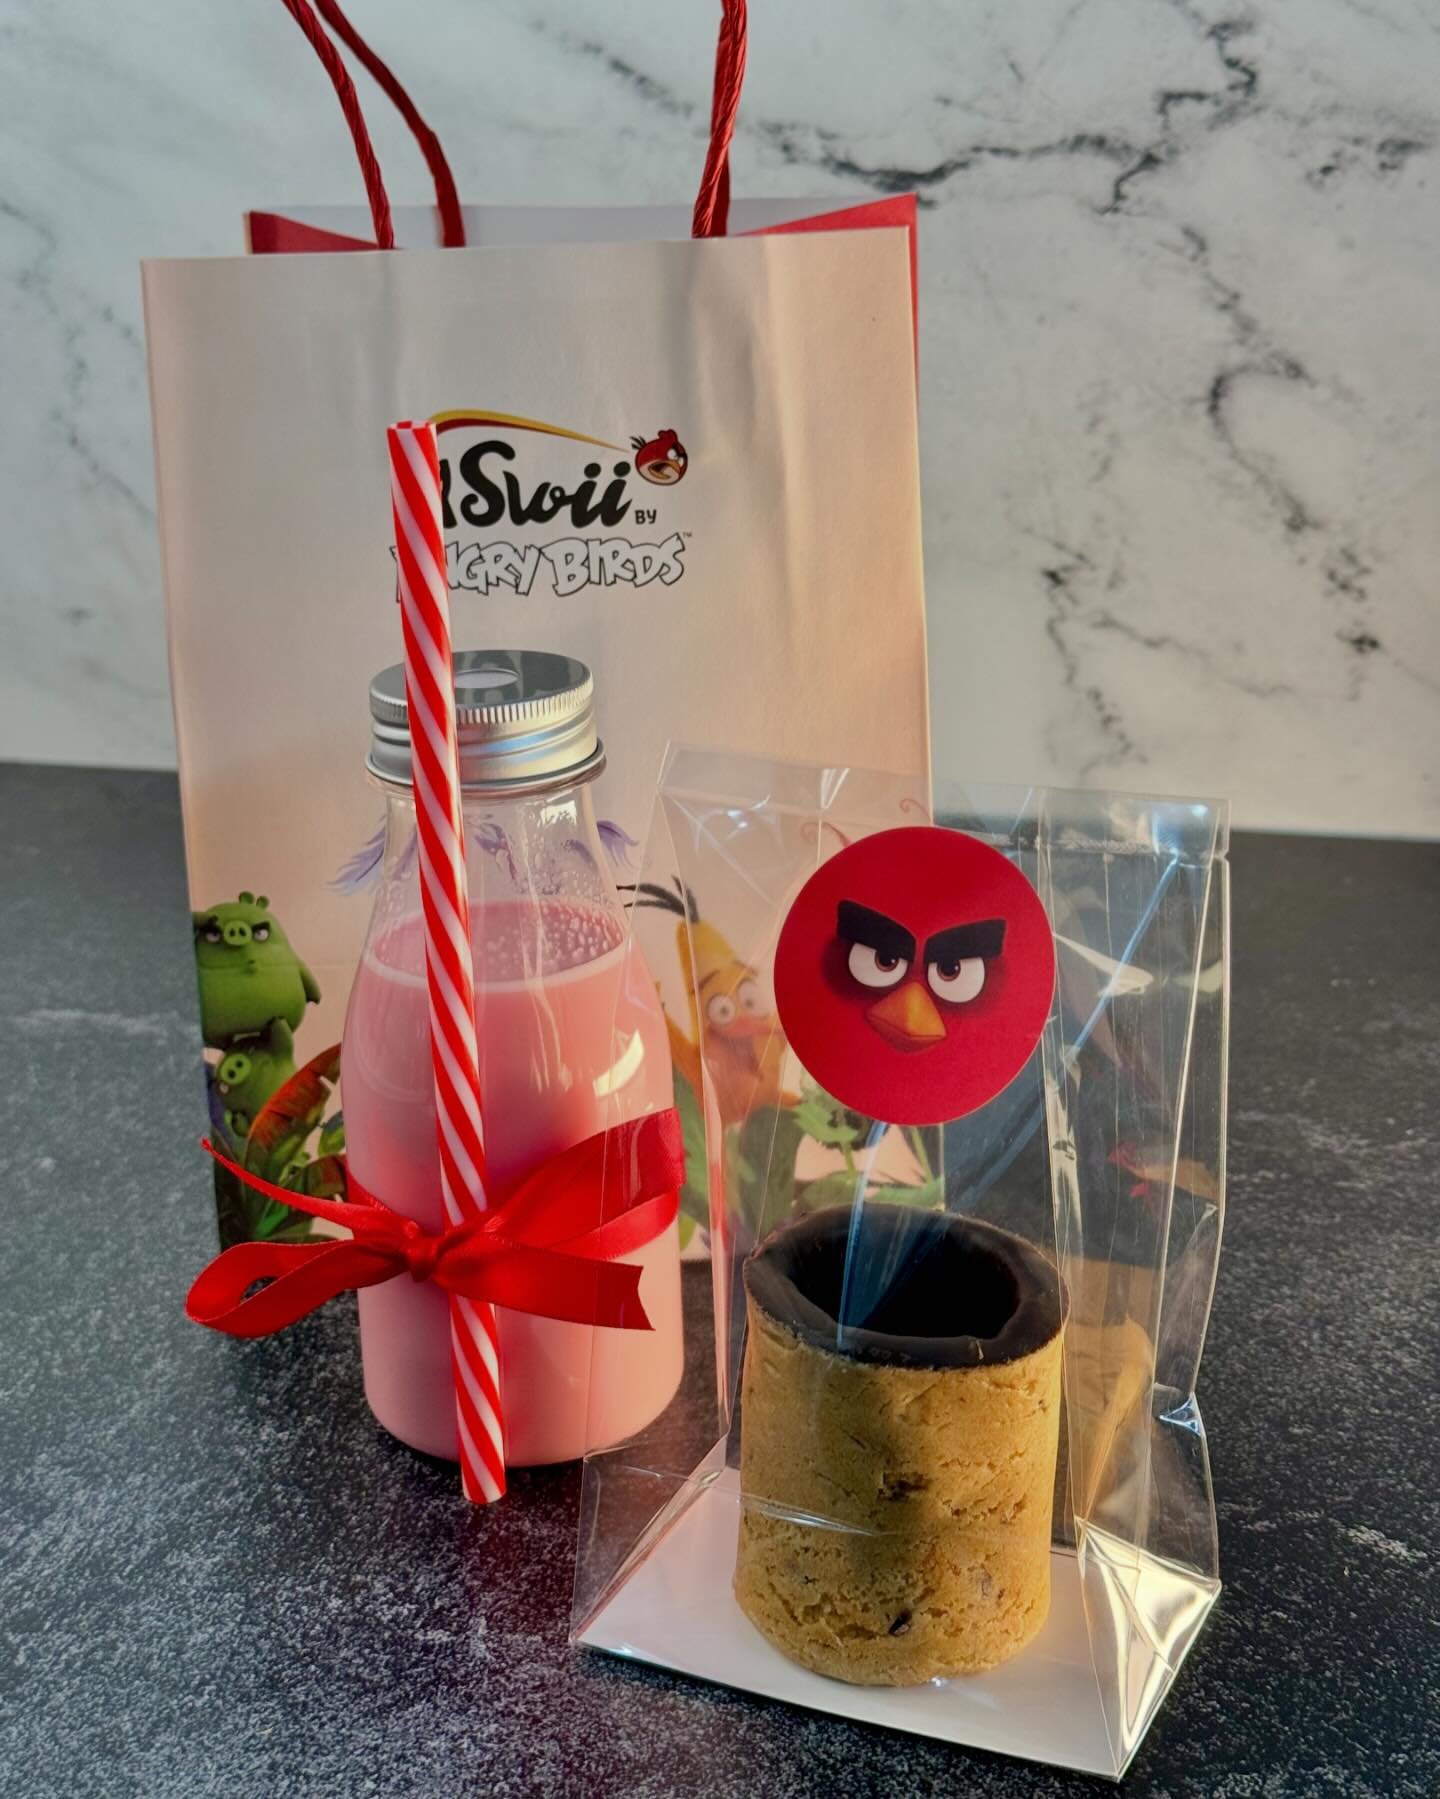 Cookies Shots anyone?? 🙋&zwj;♀️🍪🥛

Try our delicious cookie shots paired with your choice of Strawberry or Banana Milk! 🍓🍌

#iswiibyangrybirds #angrybirds #angrybirdsretailcafe #retailcafe #sweets #desserts #flushing #queens #tangramflushing #ta